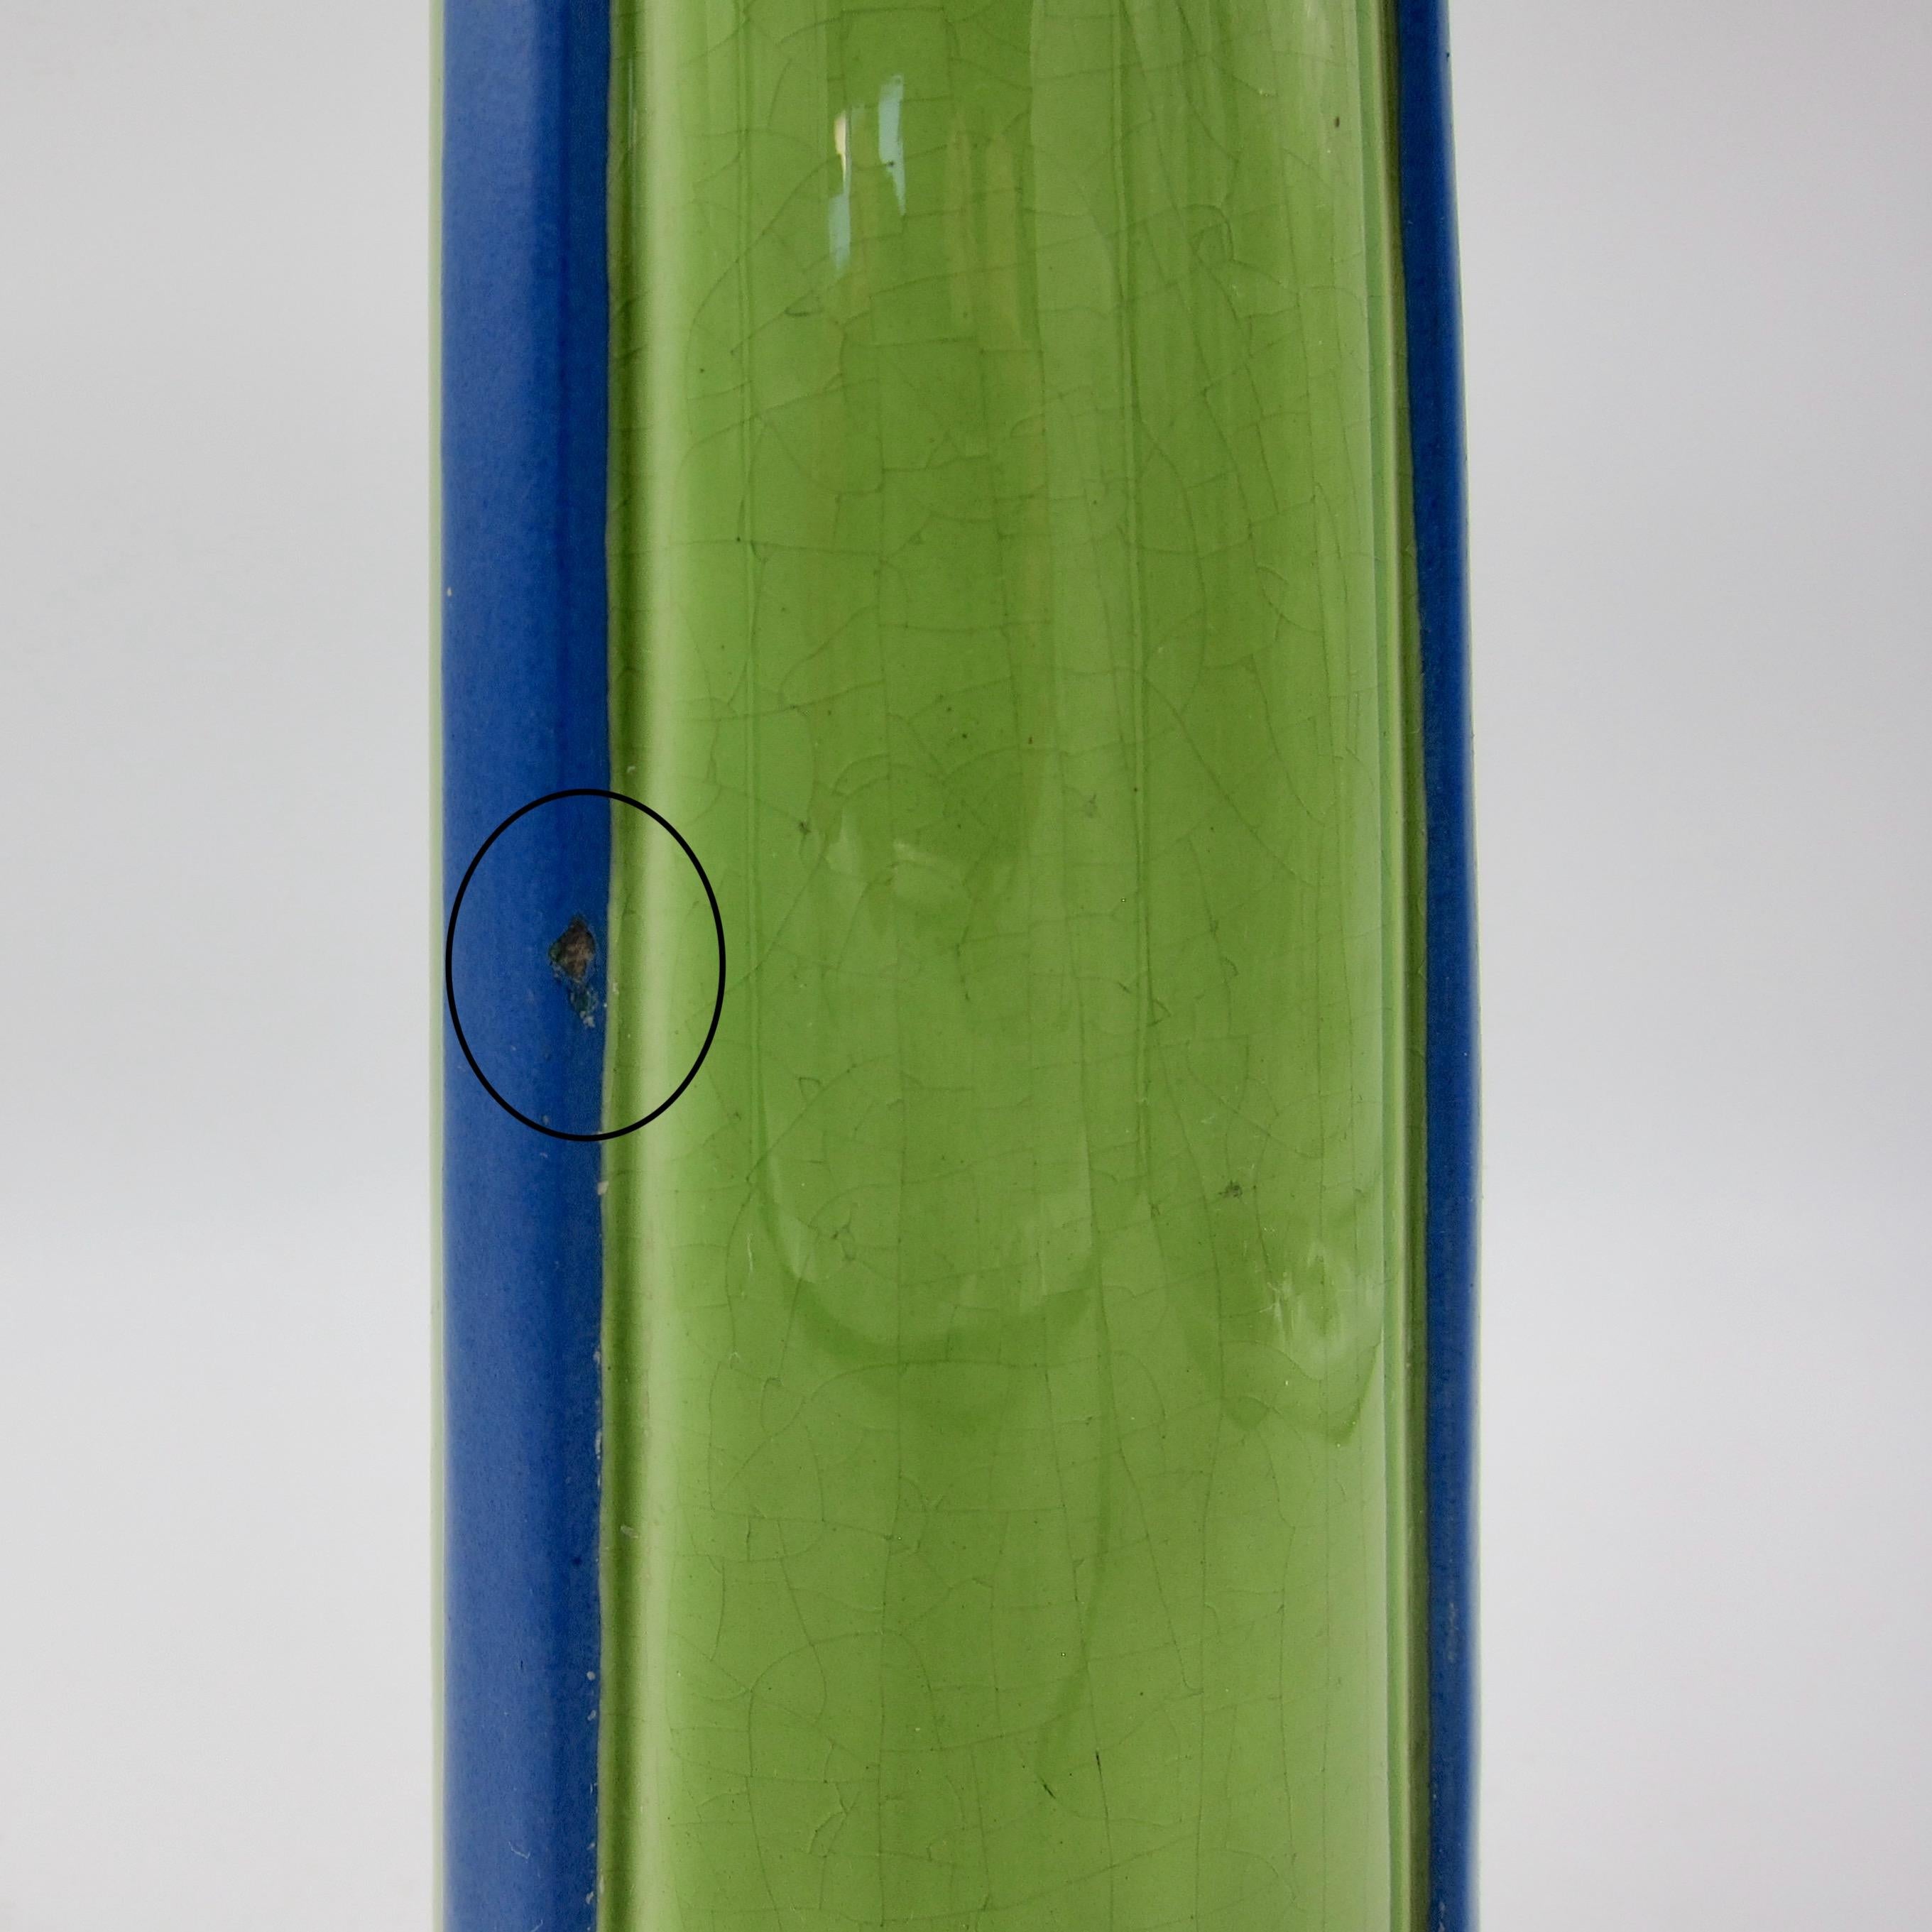 Glazed French Sarreguemines Art Pottery Vase in Blue, Green and Gold, Marked 1906